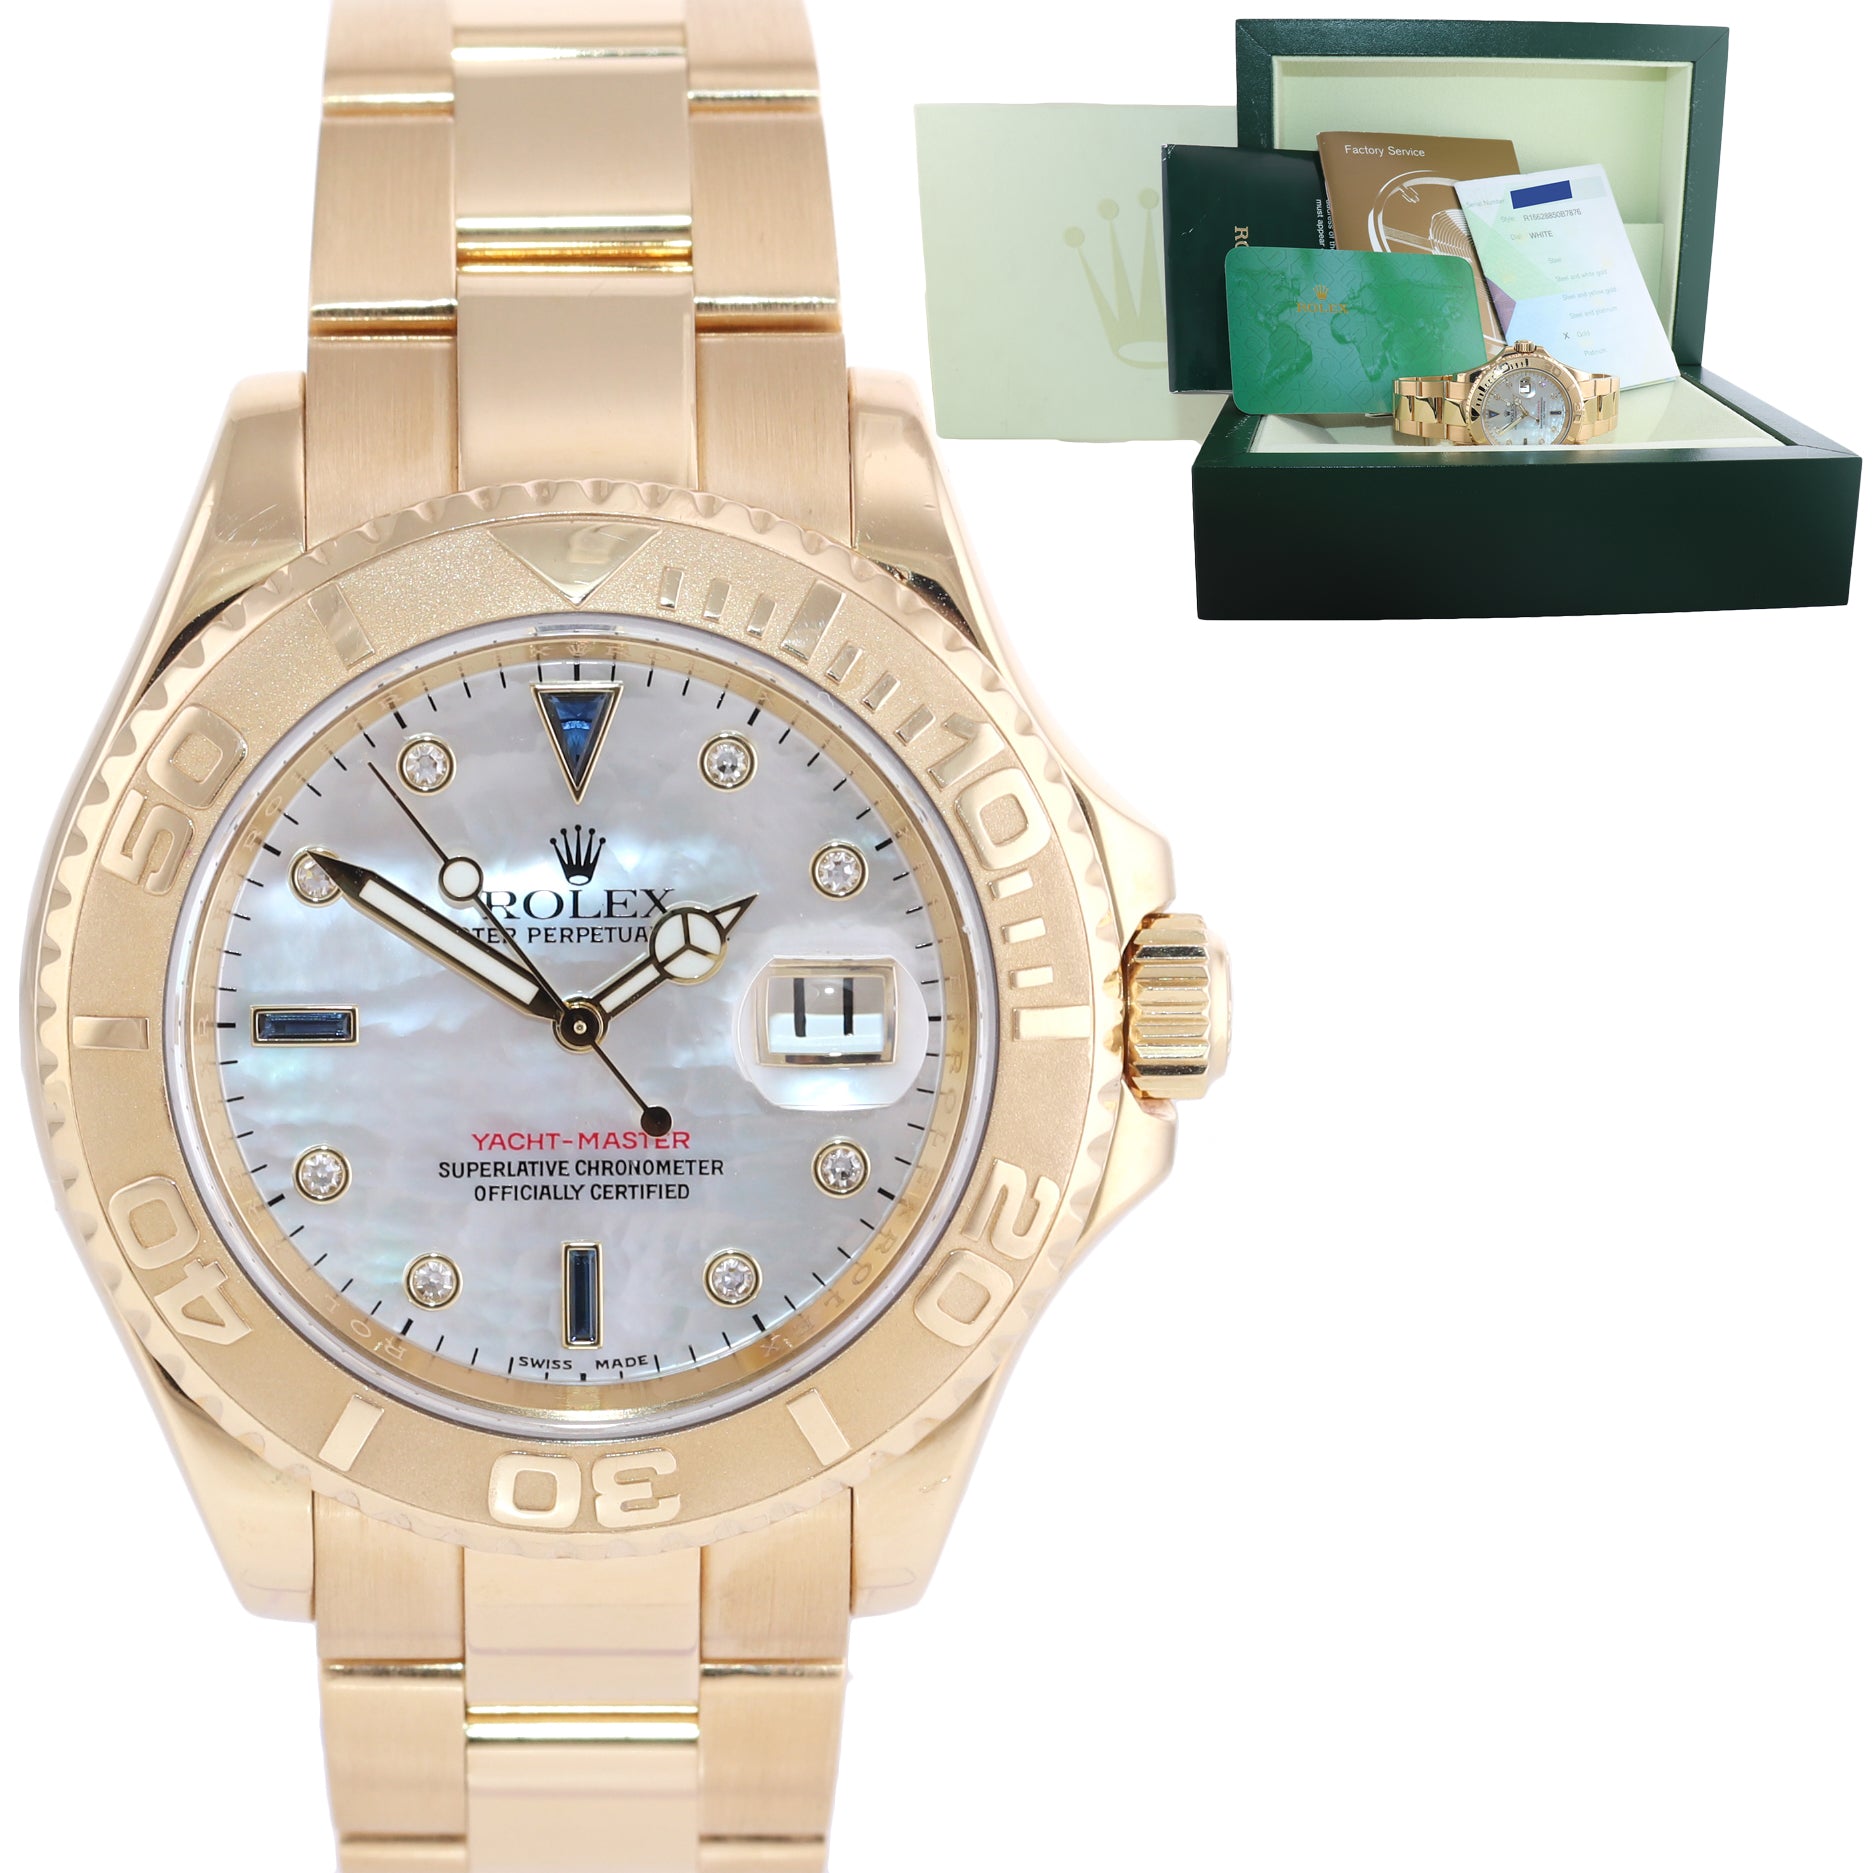 2007 PAPERS FACTORY Diamond MOP Rolex Yacht-Master Yellow Gold 16628 Watch